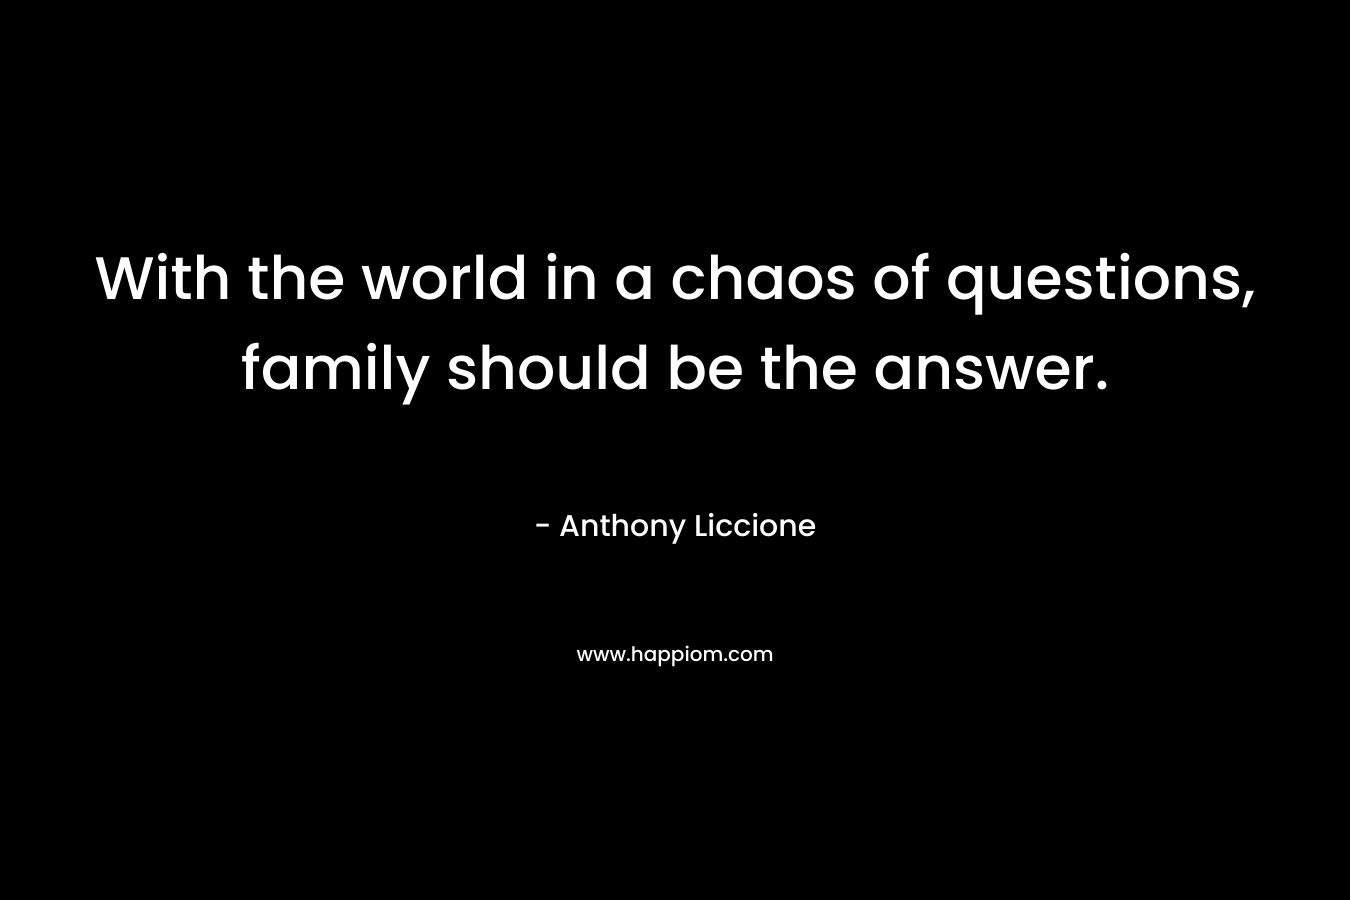 With the world in a chaos of questions, family should be the answer.